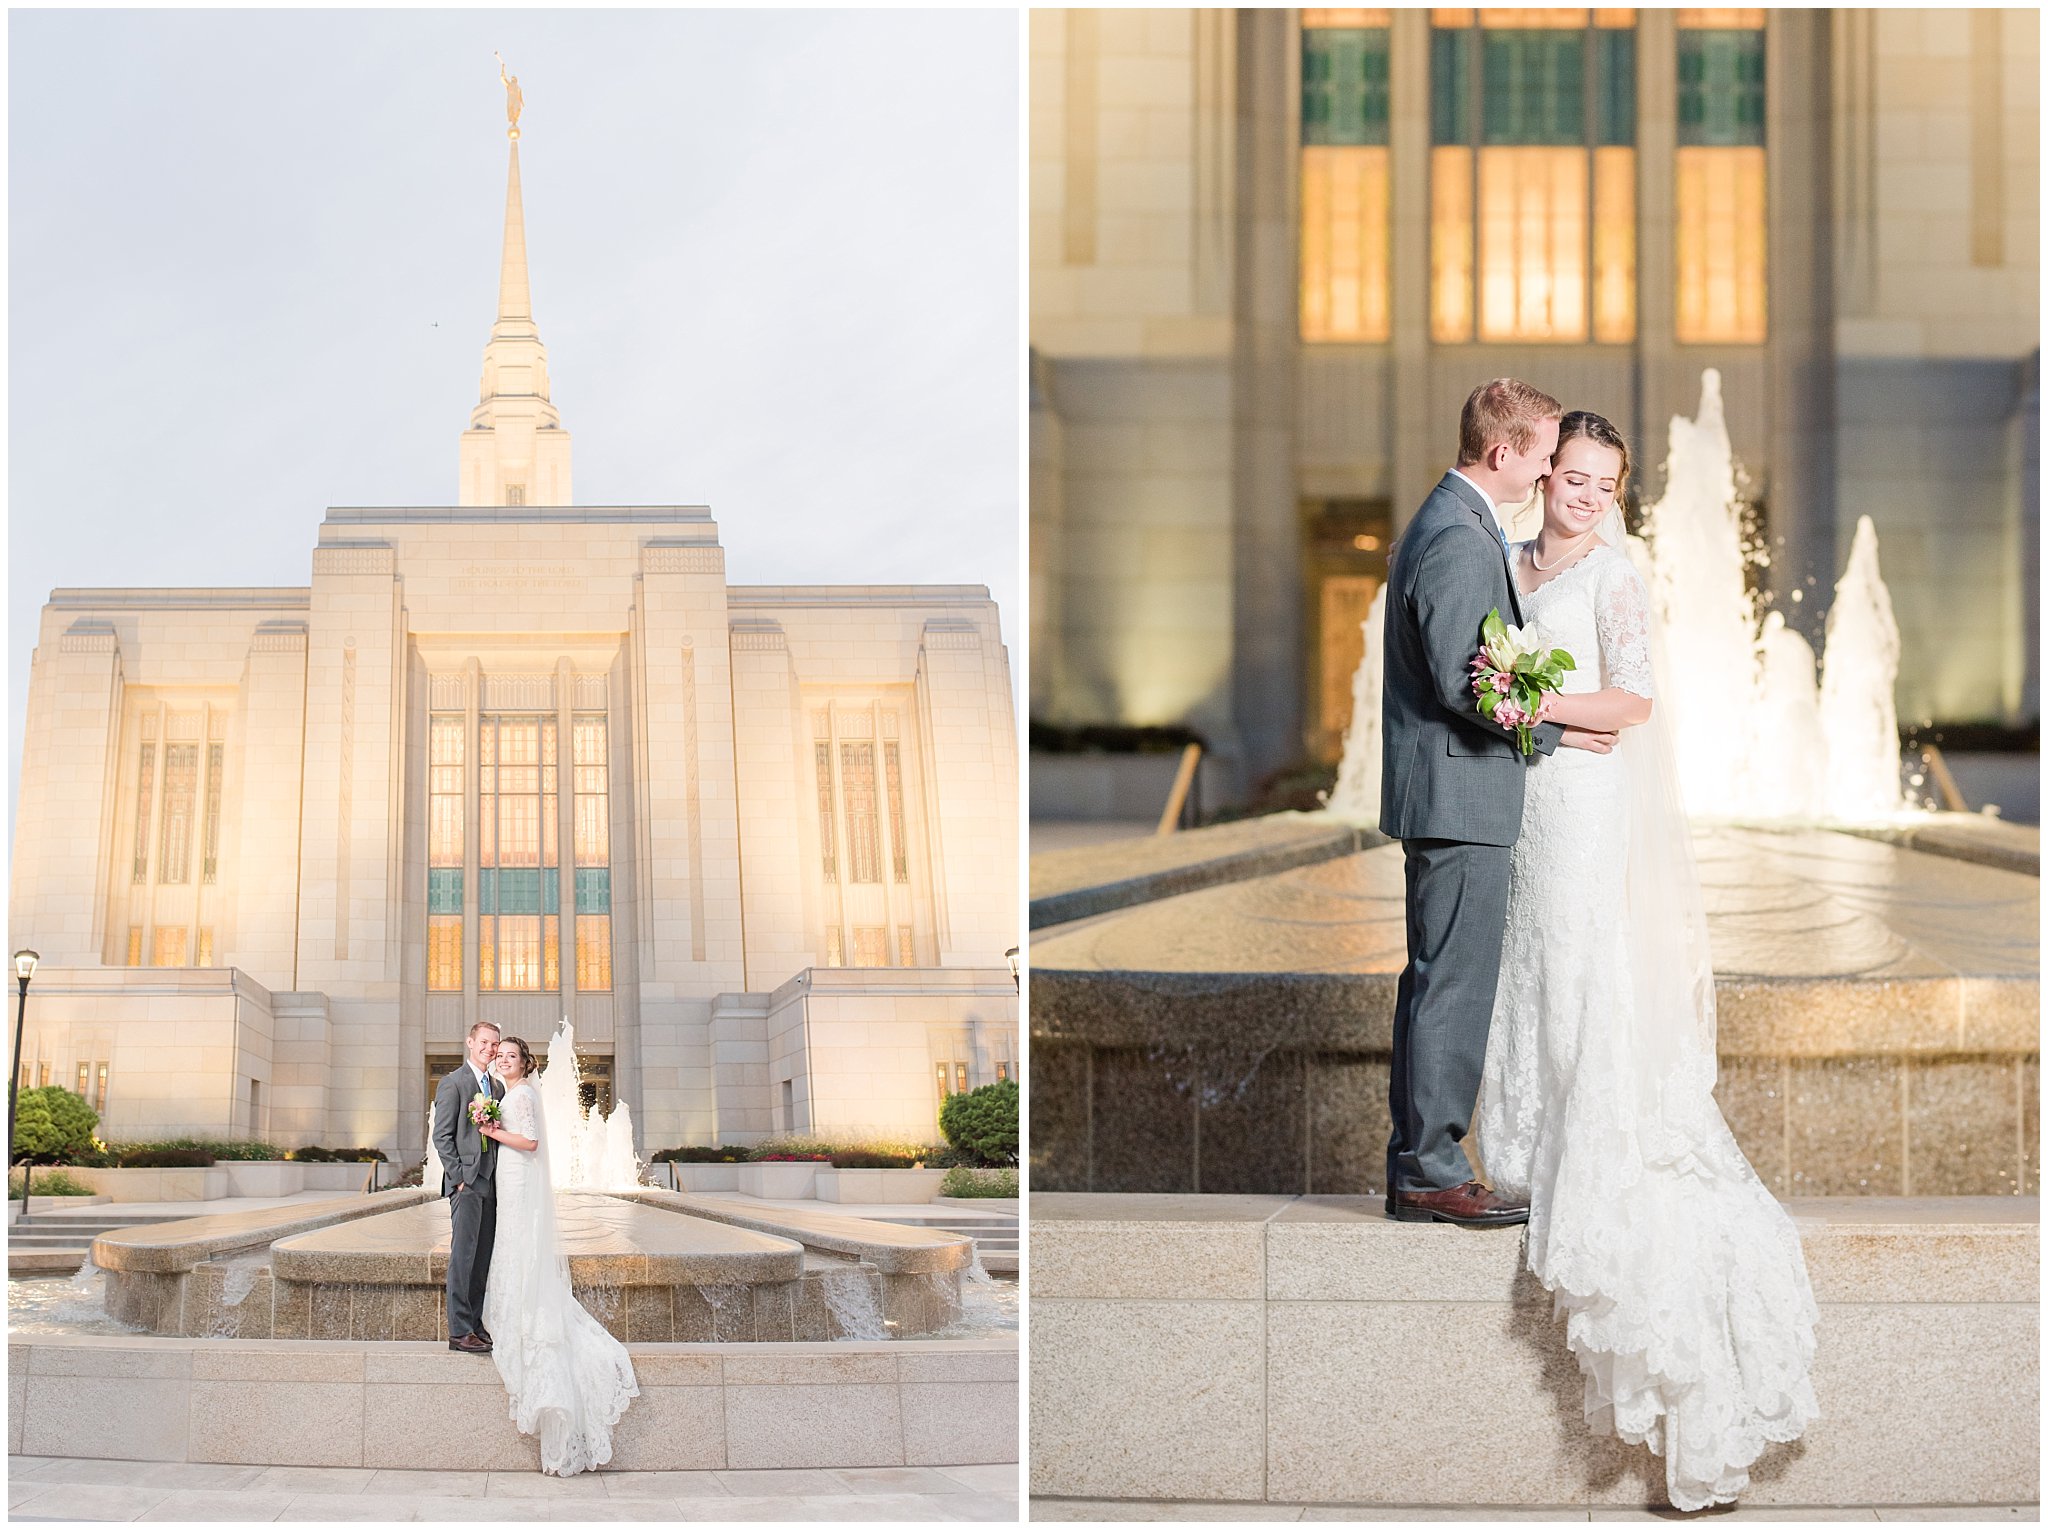 Bride and groom portraits at sunset at the Ogden Temple | Bride in elegant lace dress and veil, groom in grey suit and light blue tie | Ogden Temple Summer Formal Session | Ogden Temple Wedding | Jessie and Dallin Photography